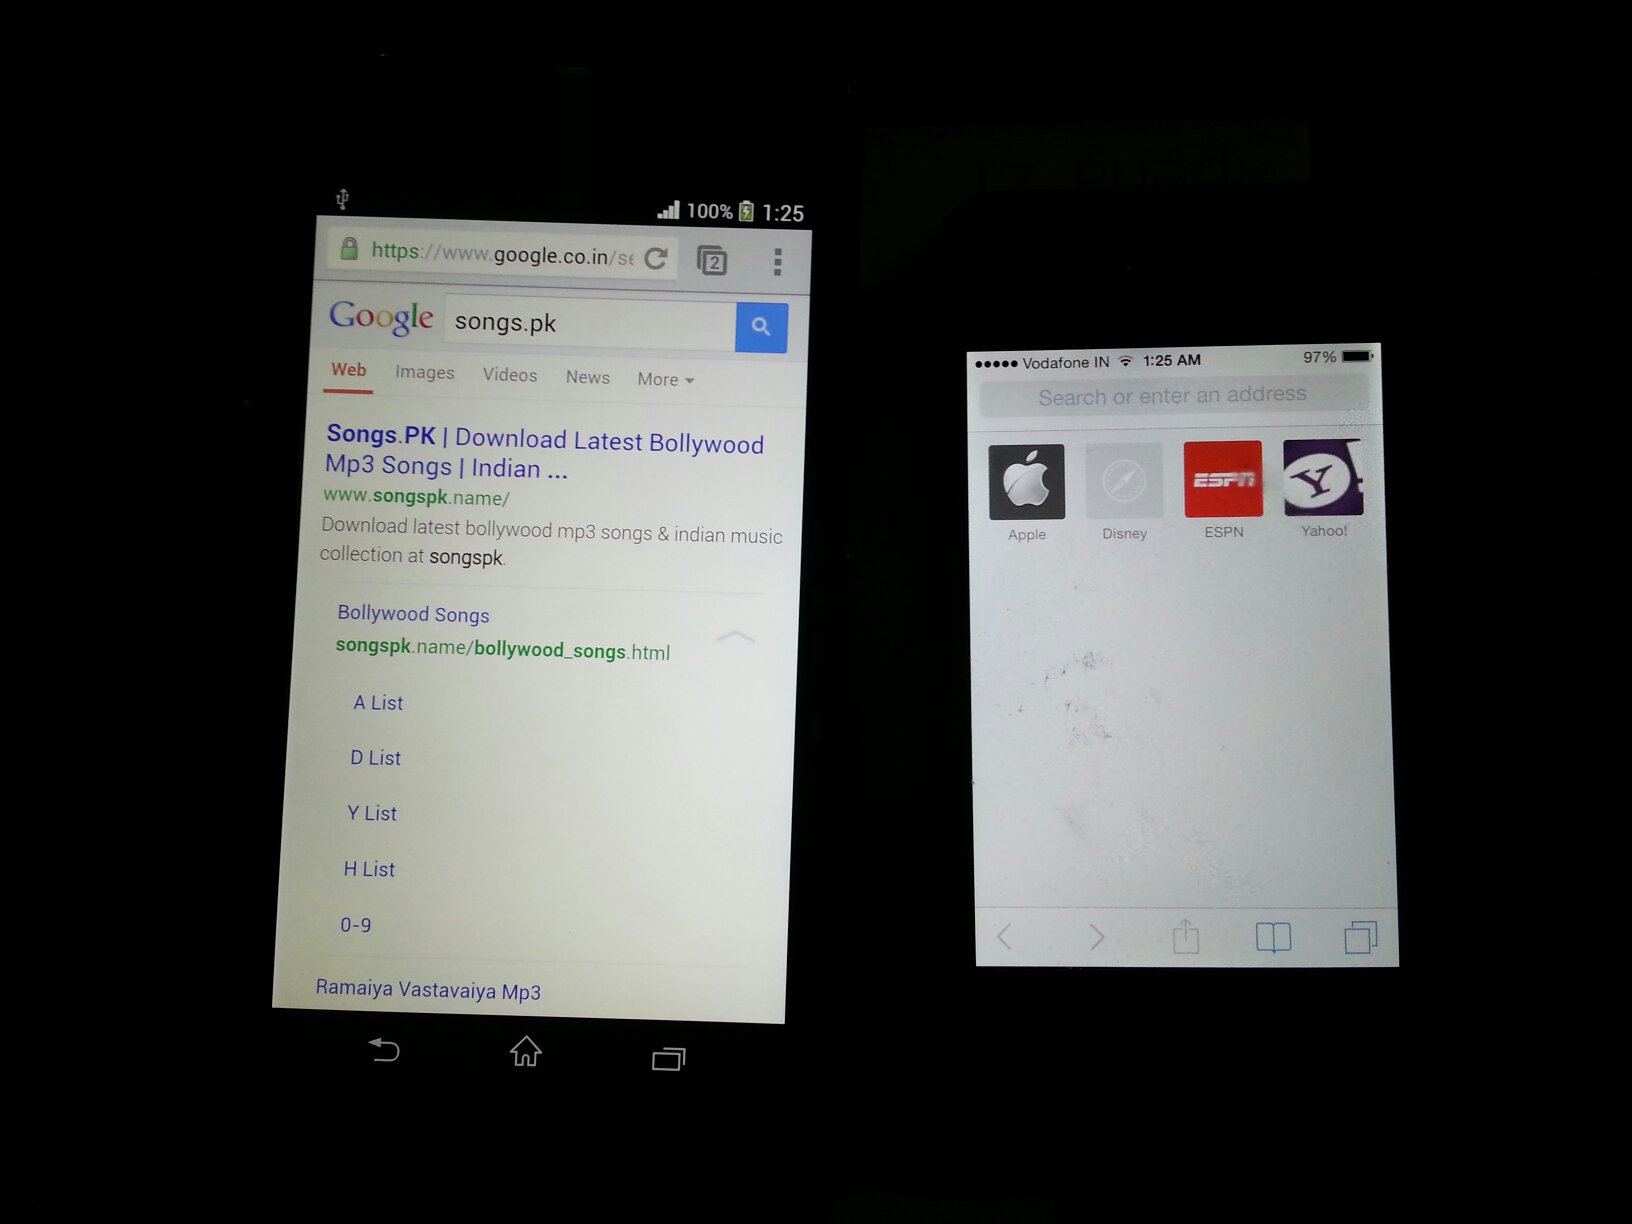 Sony Xperia Z1 Yellow Hue Tint Issue on Screen Display